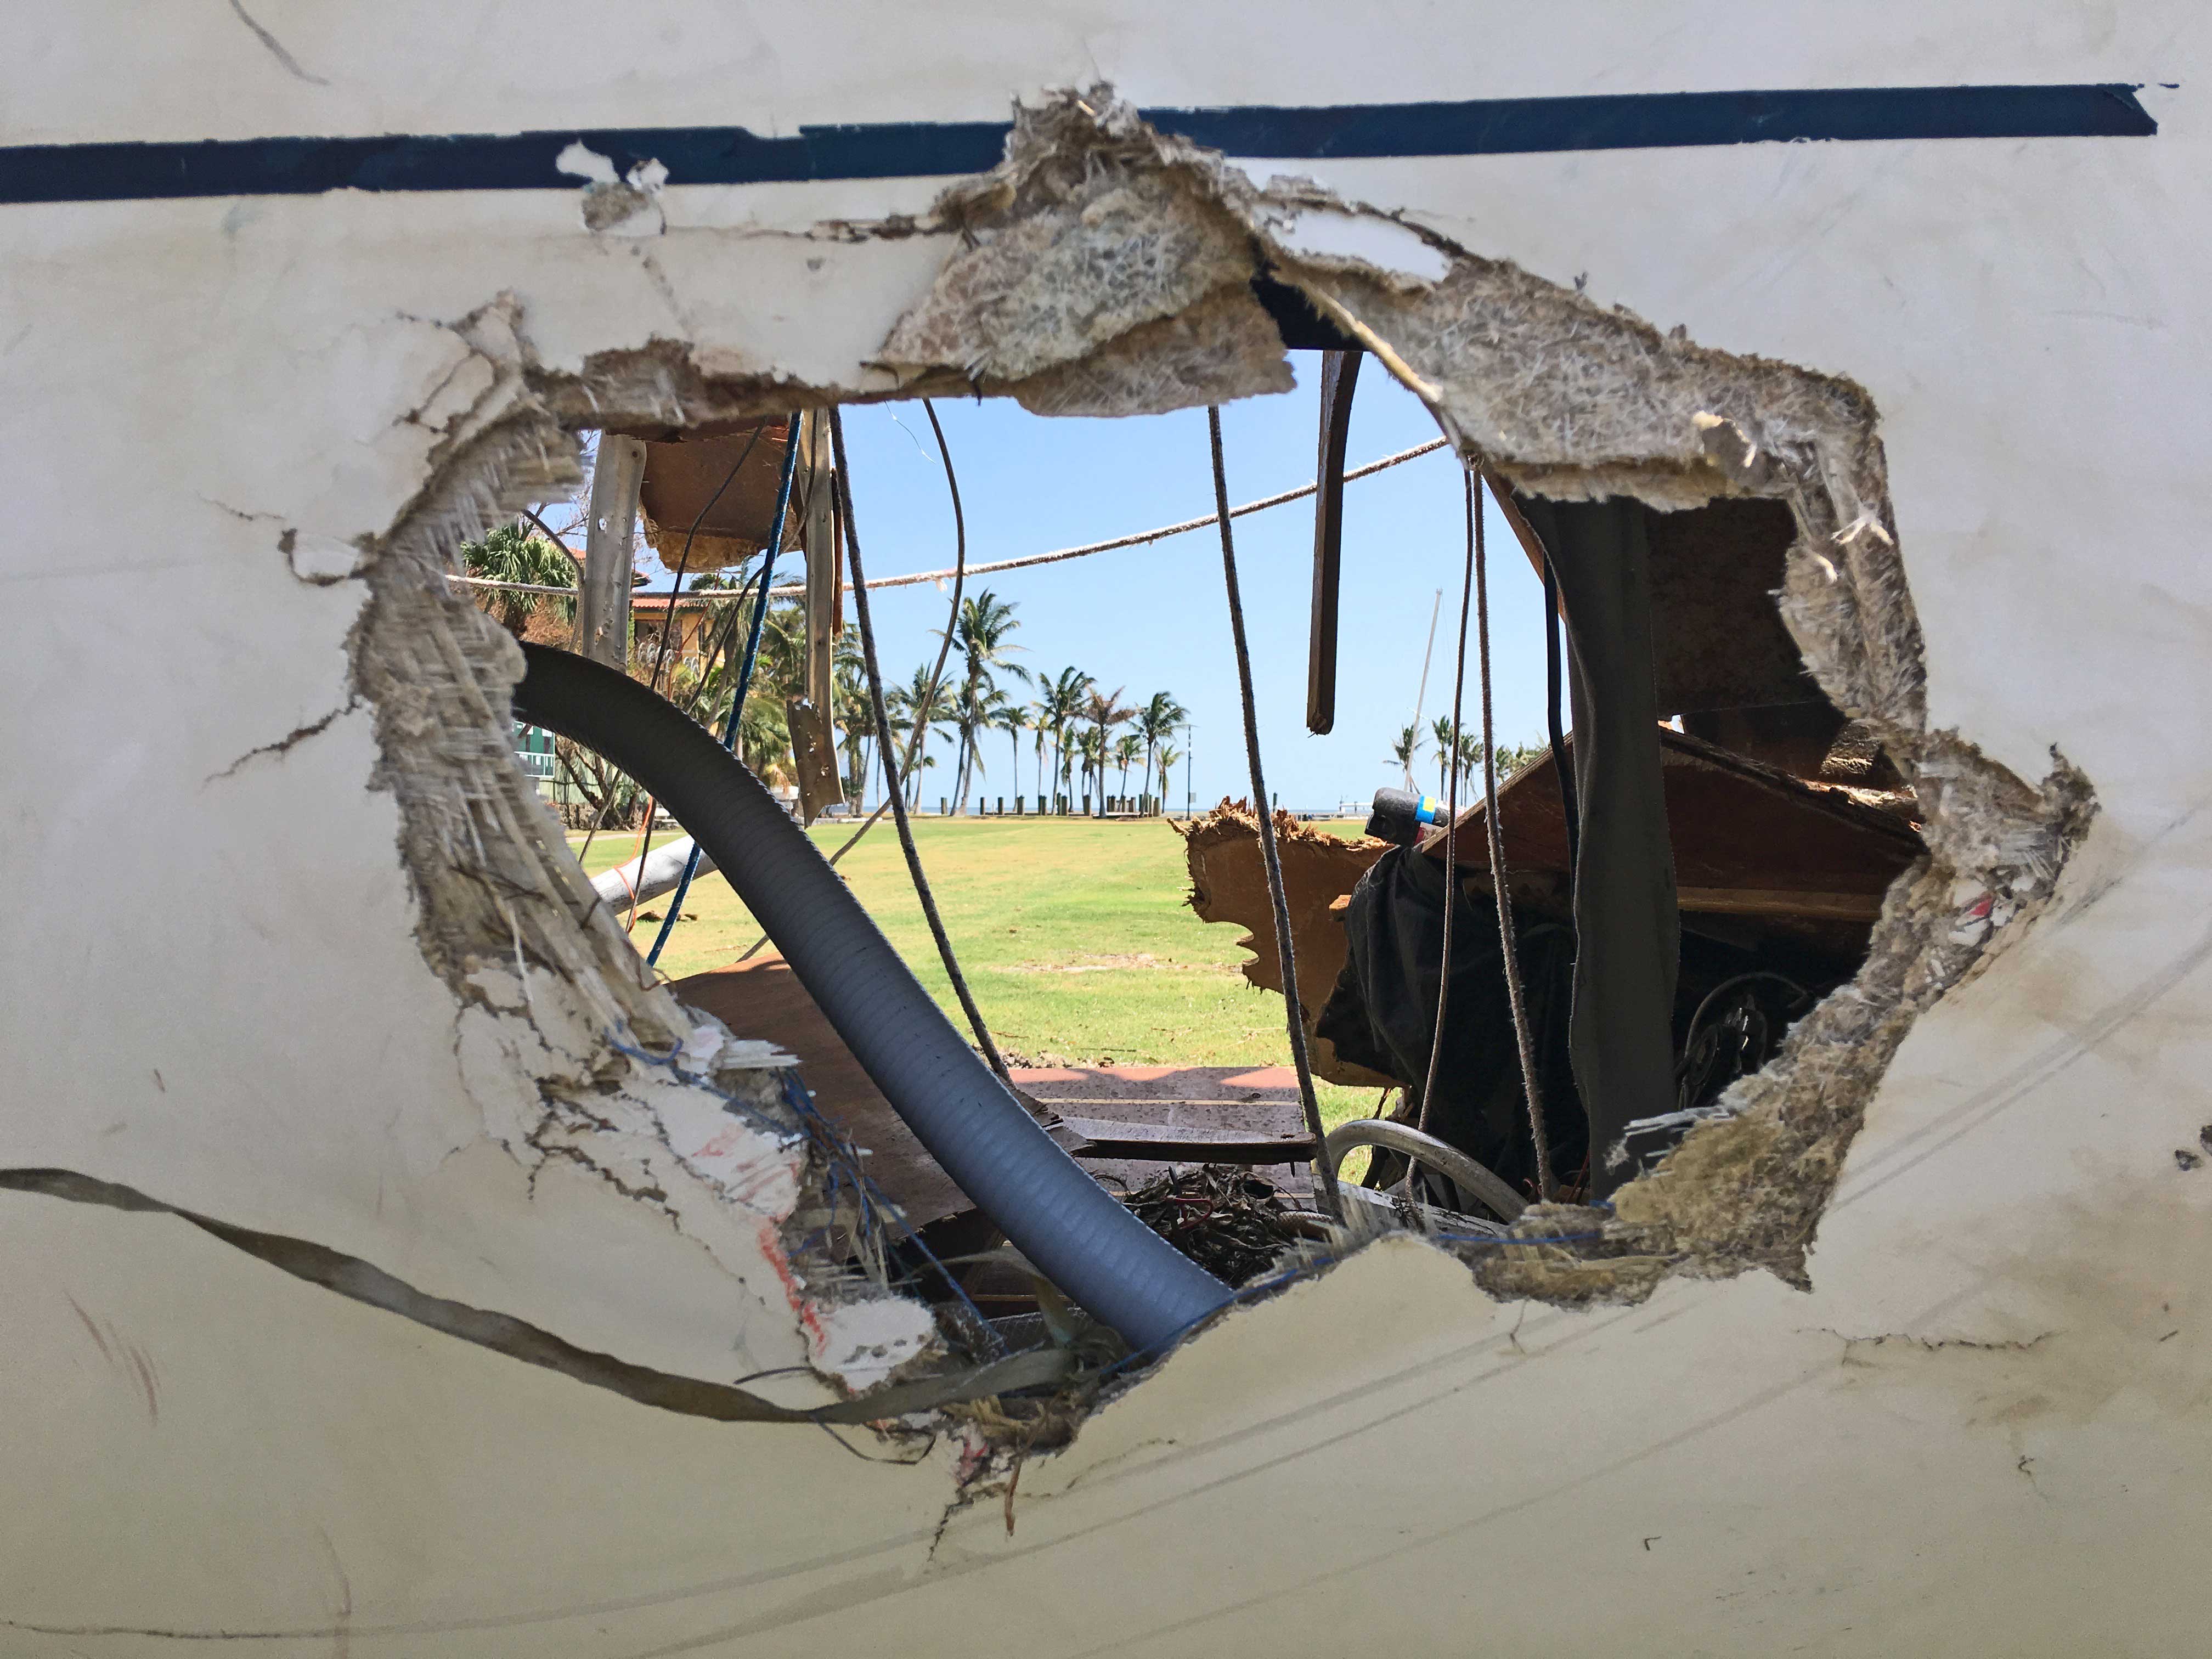 Boat Owners Association of The United States (BoatUS) estimates that Hurricane Irma's damage to recreational boats will reach $500 million, with over 50,000 boats damaged or lost.